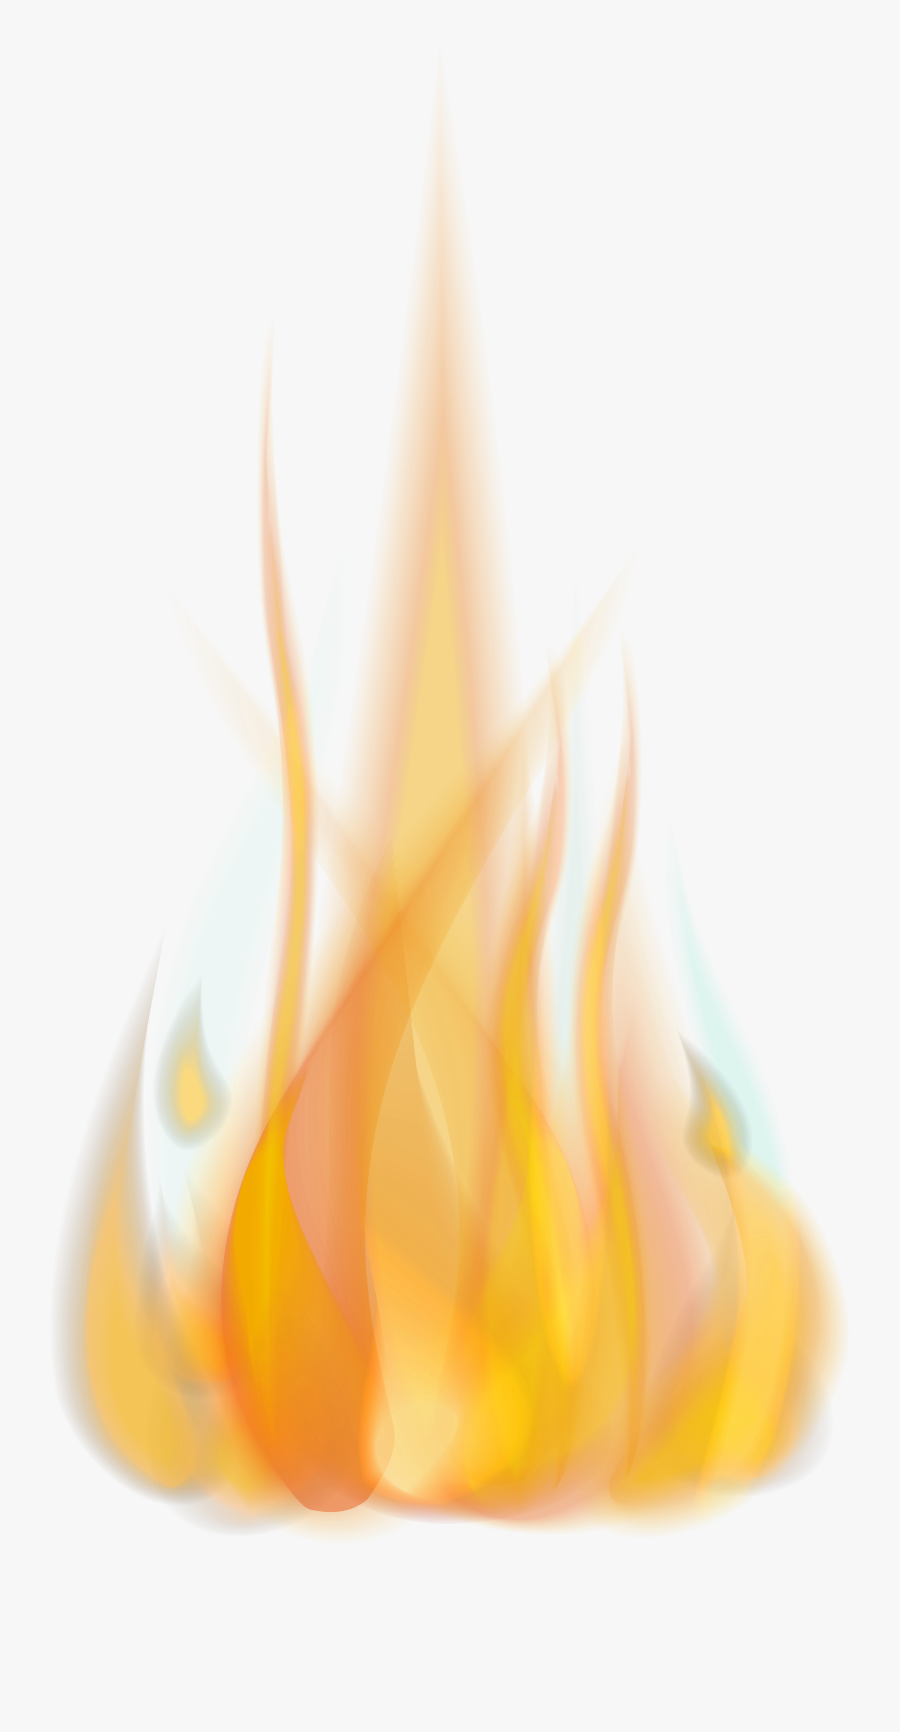 Clipart Fire At Getdrawings - Png Format Fire Flame Png, Transparent Clipart